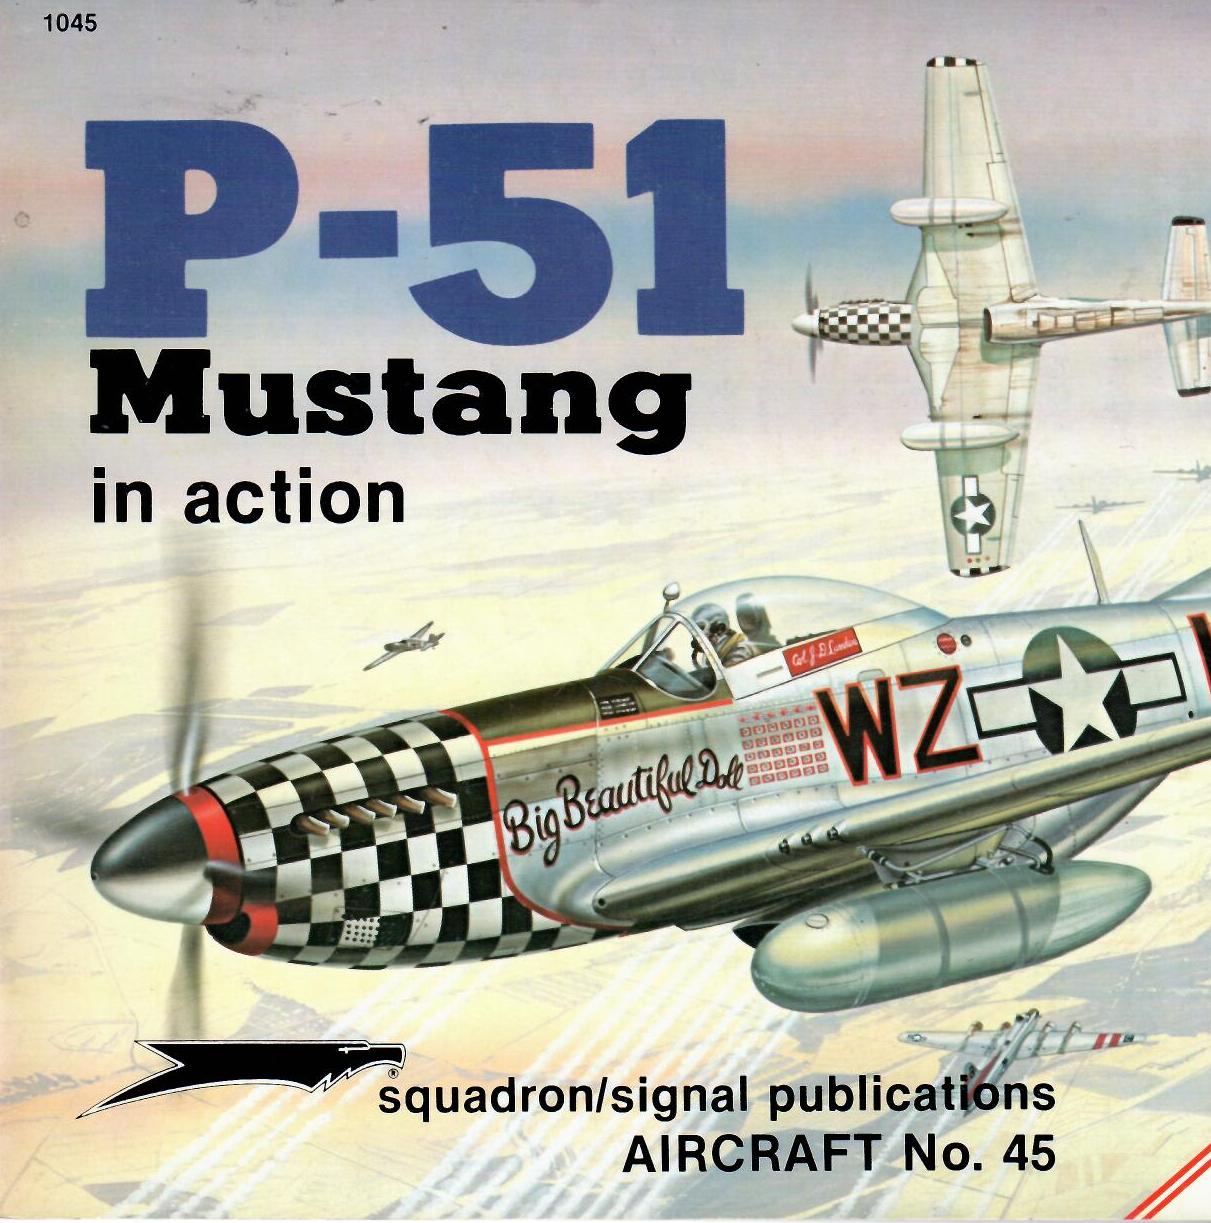 P-51 Mustang in action